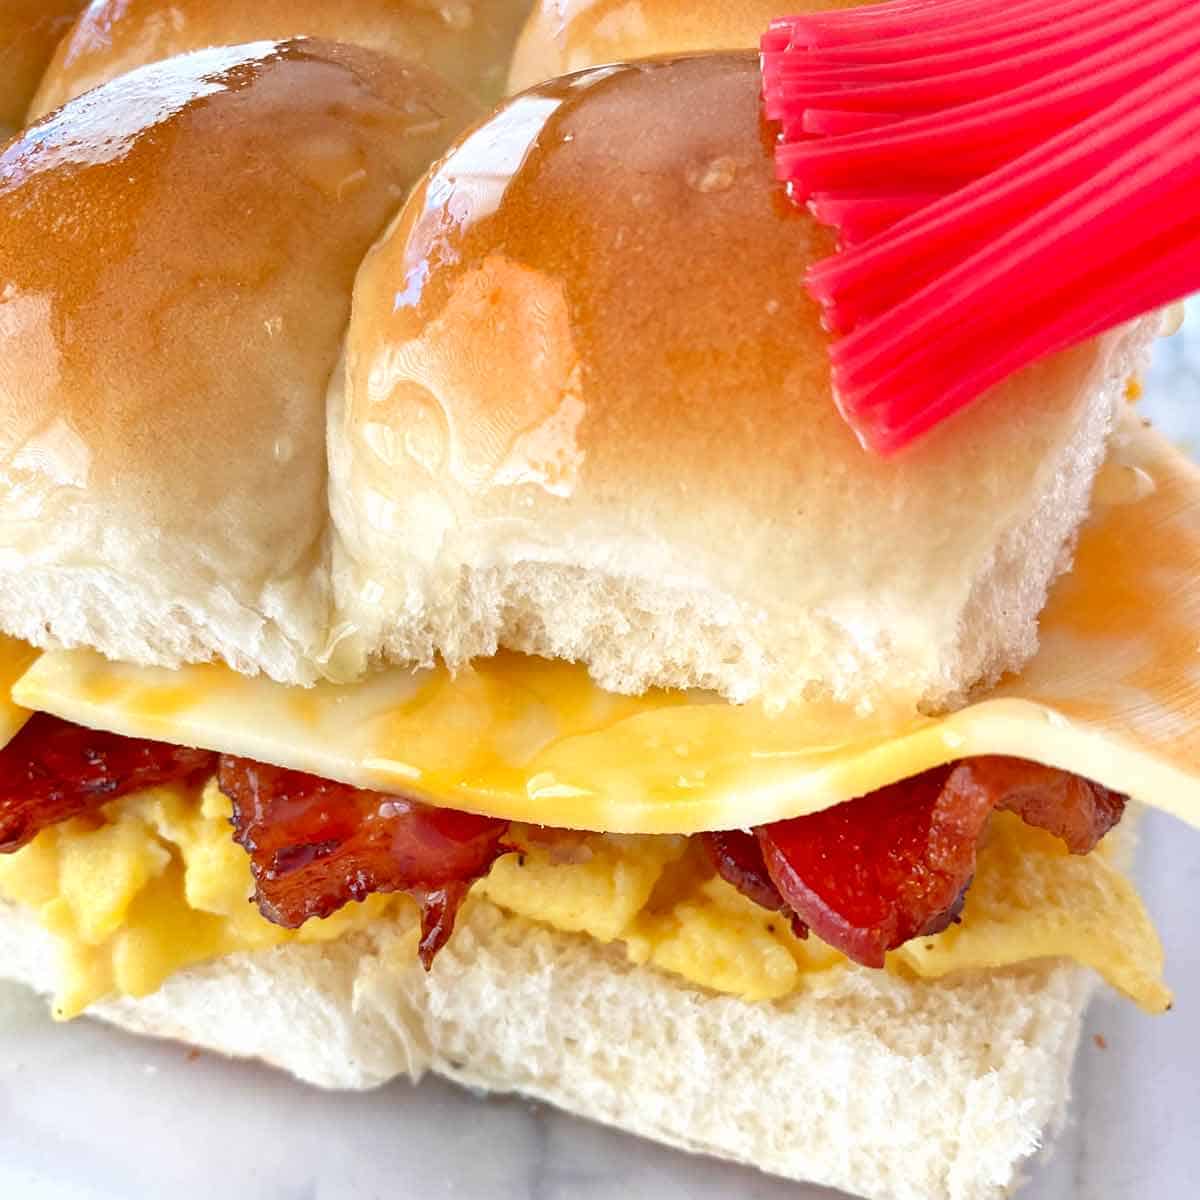 Brushing breakfast sliders with melted butter before baking.